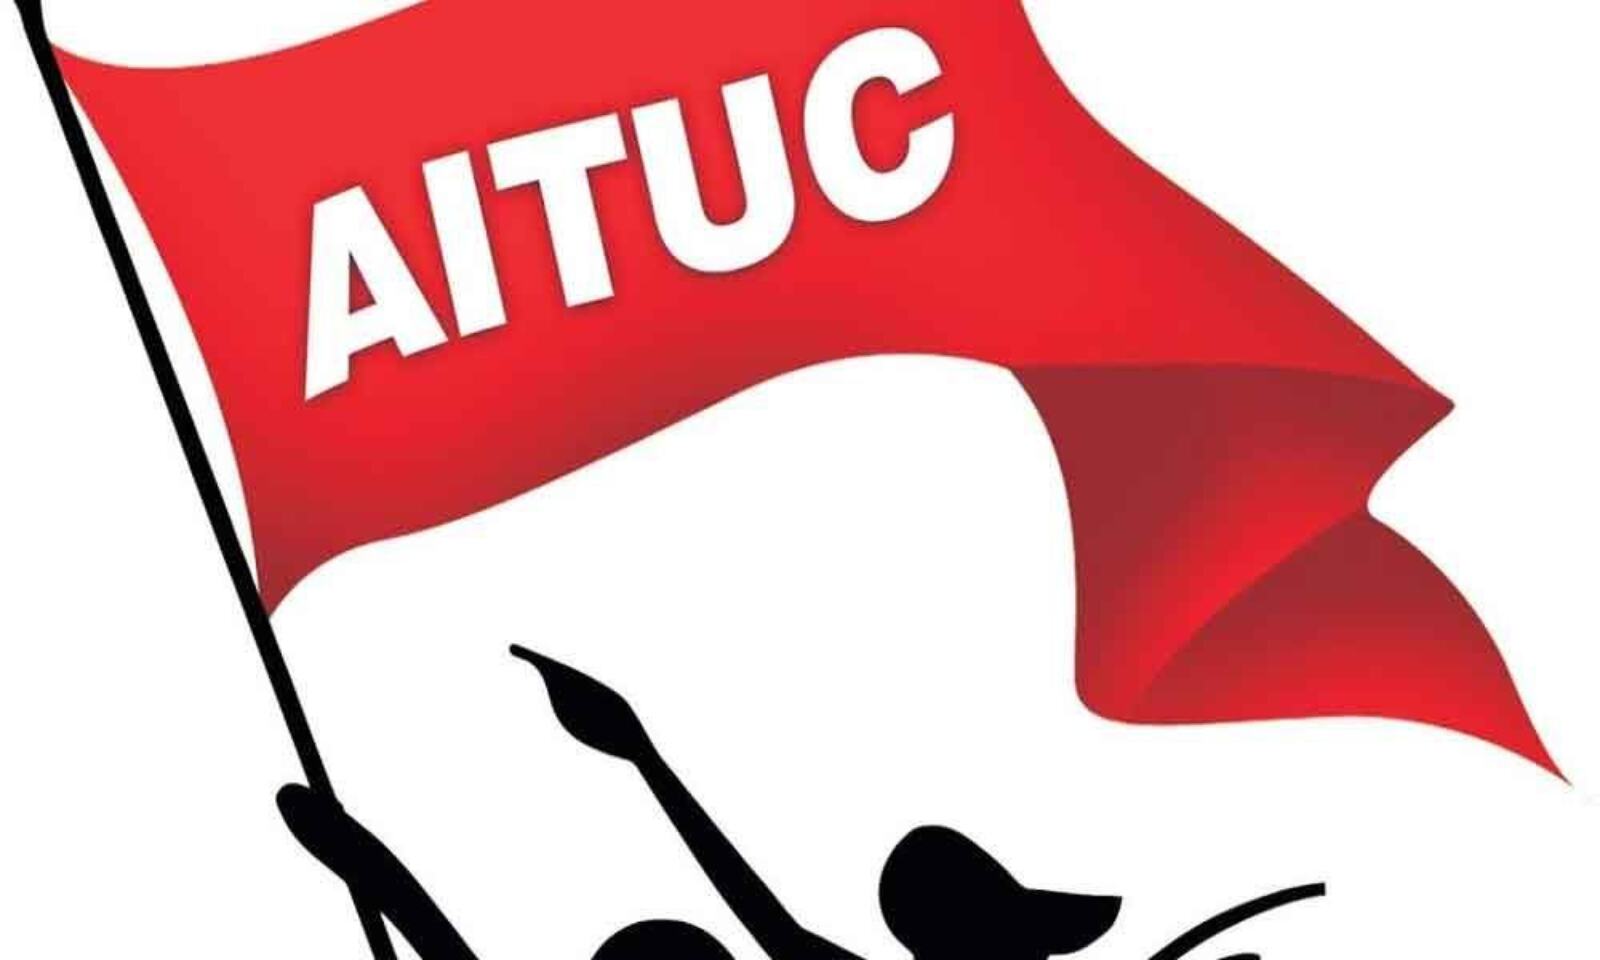 Huge rally of AITUC in Alappuzha, Kerala on December 20th, 2022 - WFTU